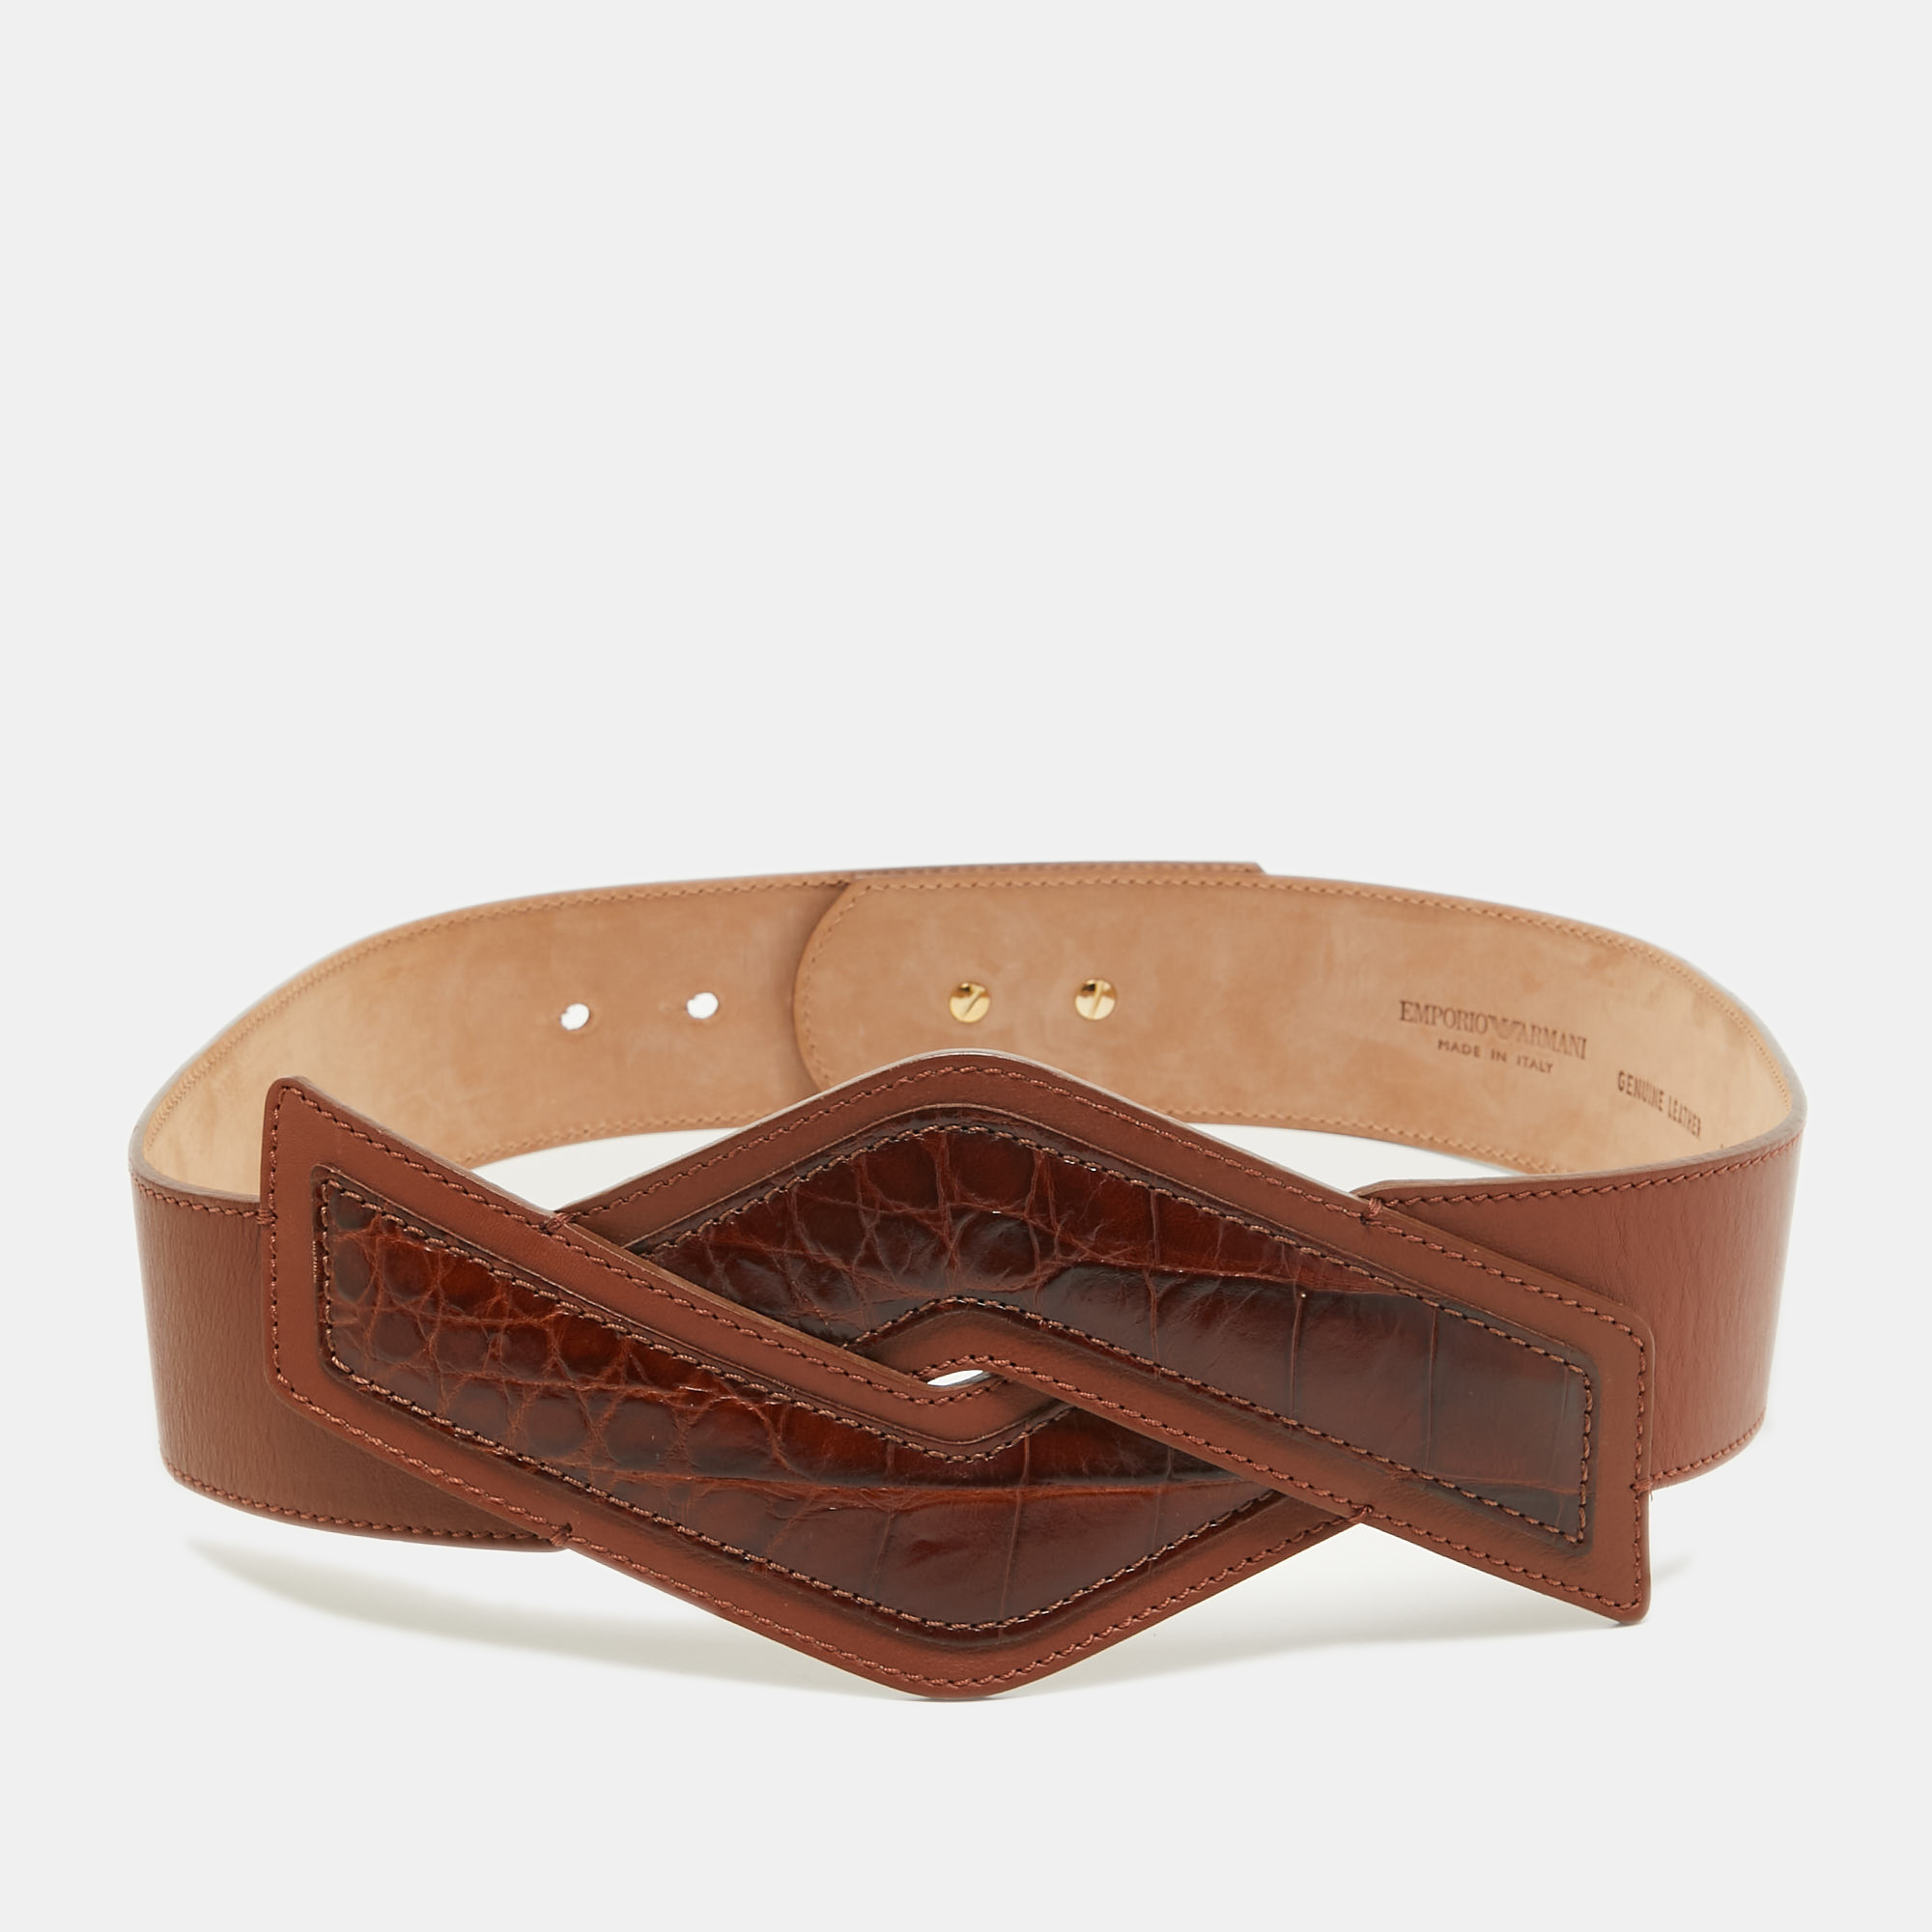 Light up your belt collection by adding this belt from Emporio Armani. It is created using croc embossed leather and this belt is a great accessory to own.